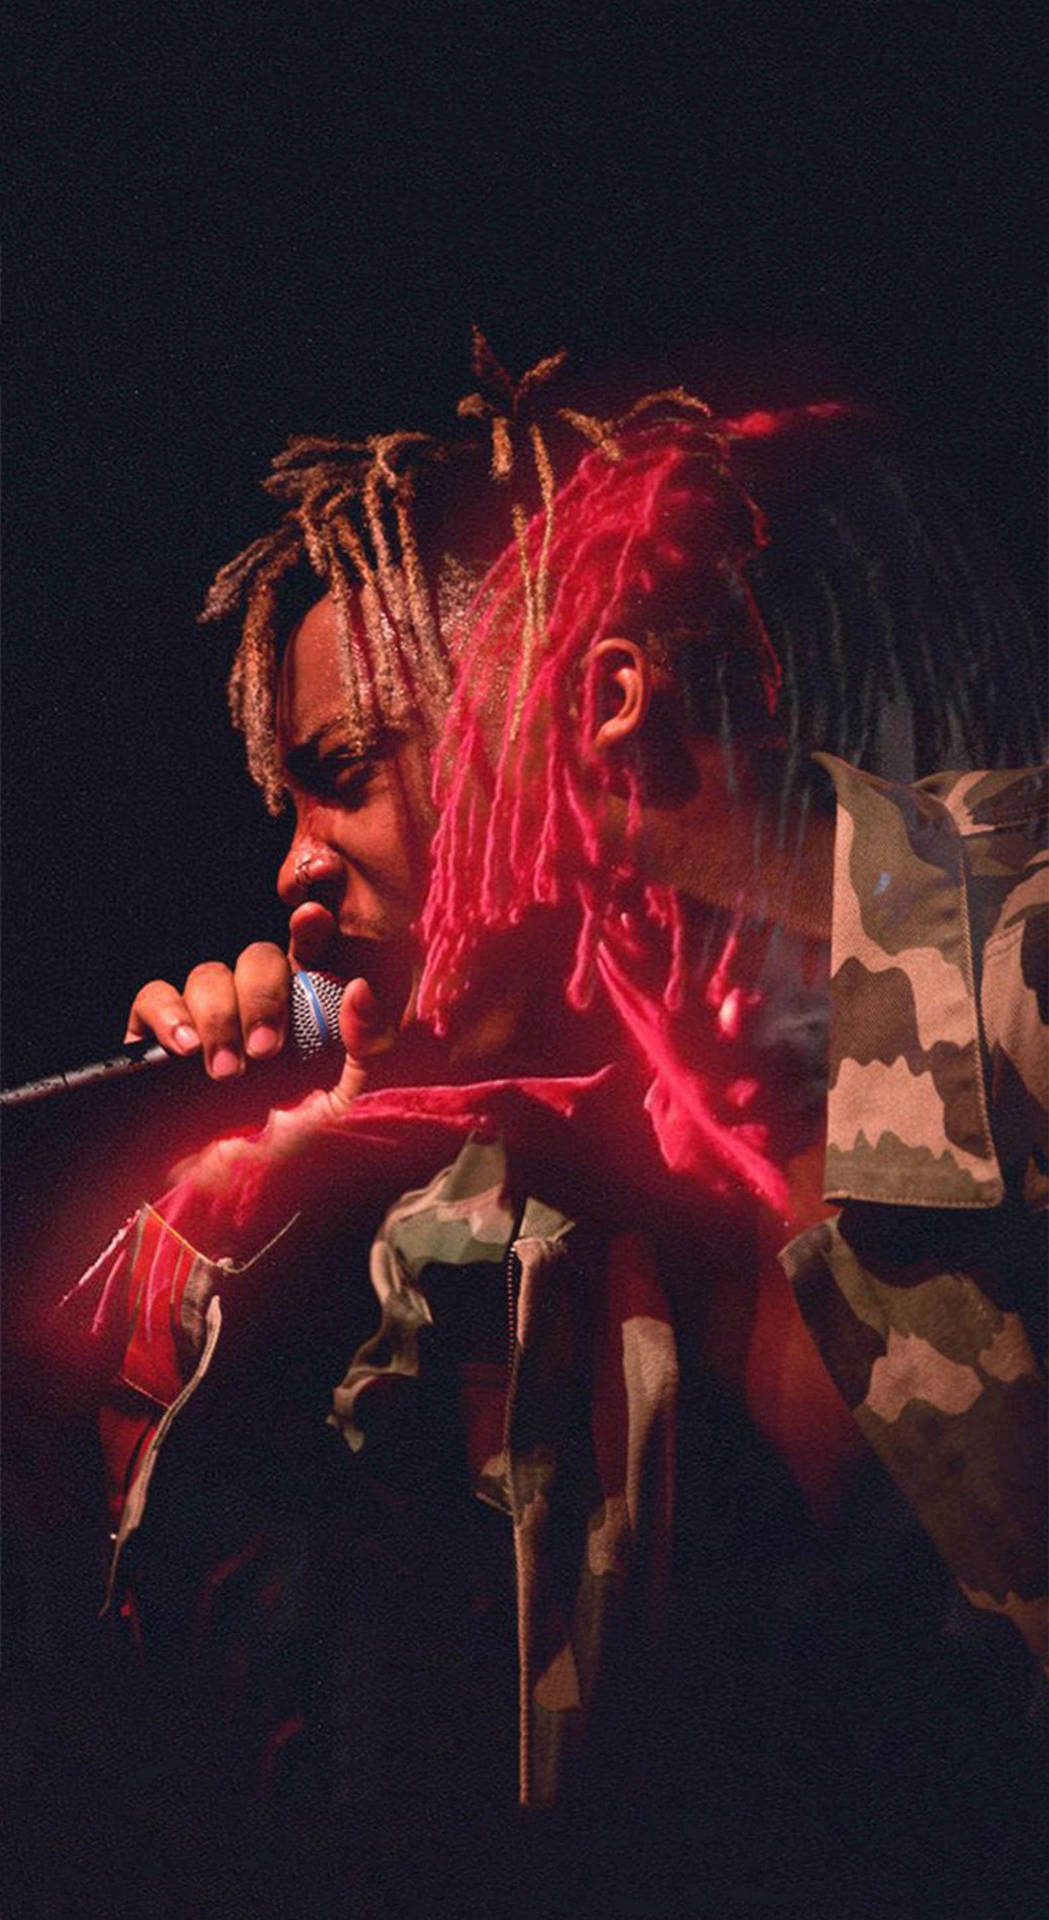 “Follow your own path and create your own aesthetic.” - Juice Wrld Wallpaper